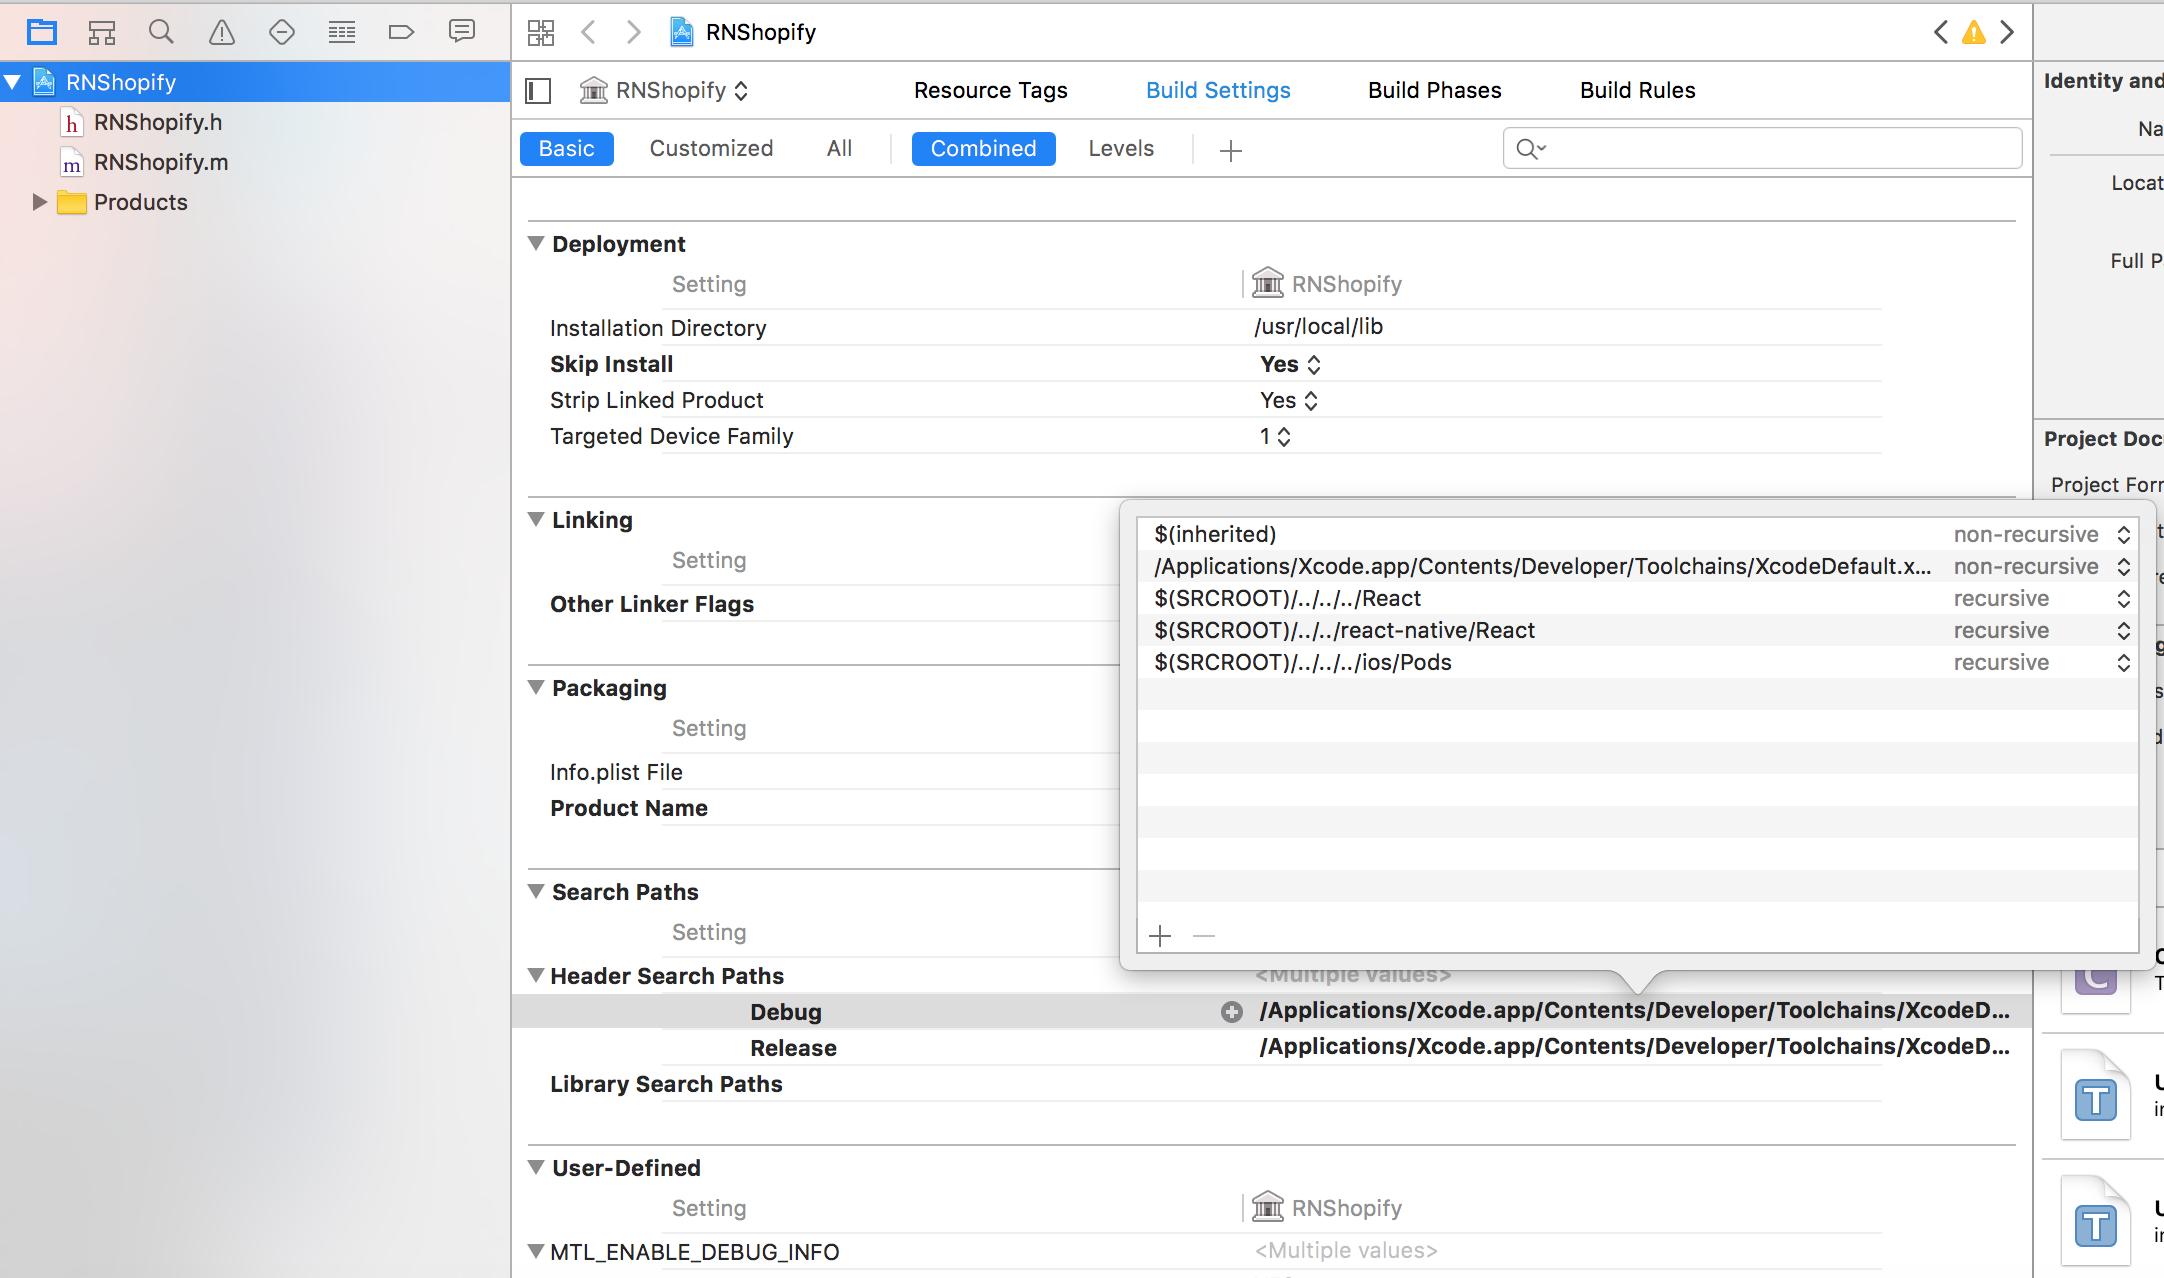 Xcode and Header Search Paths